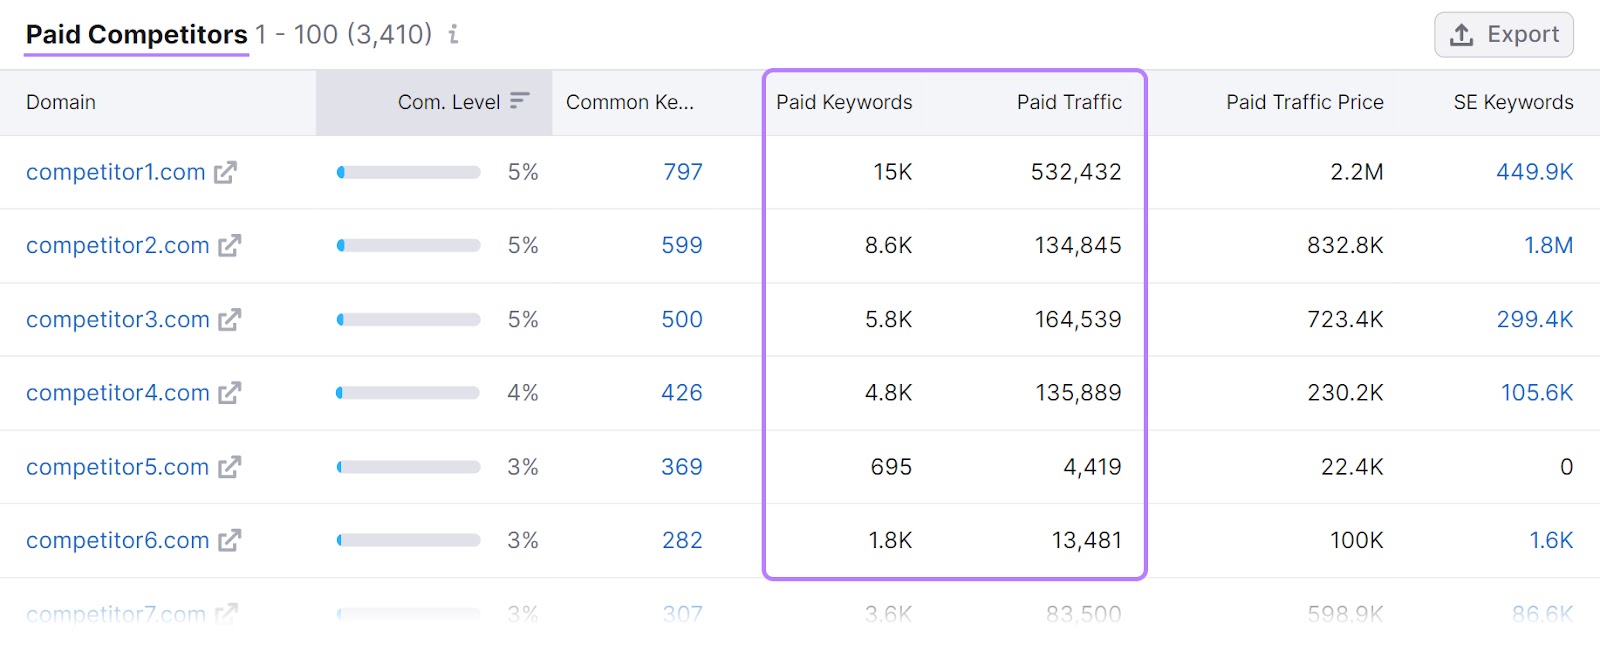 "Paid Compe،ors" table with "Paid Keywords" and " Paid Traffic" columns highlighted